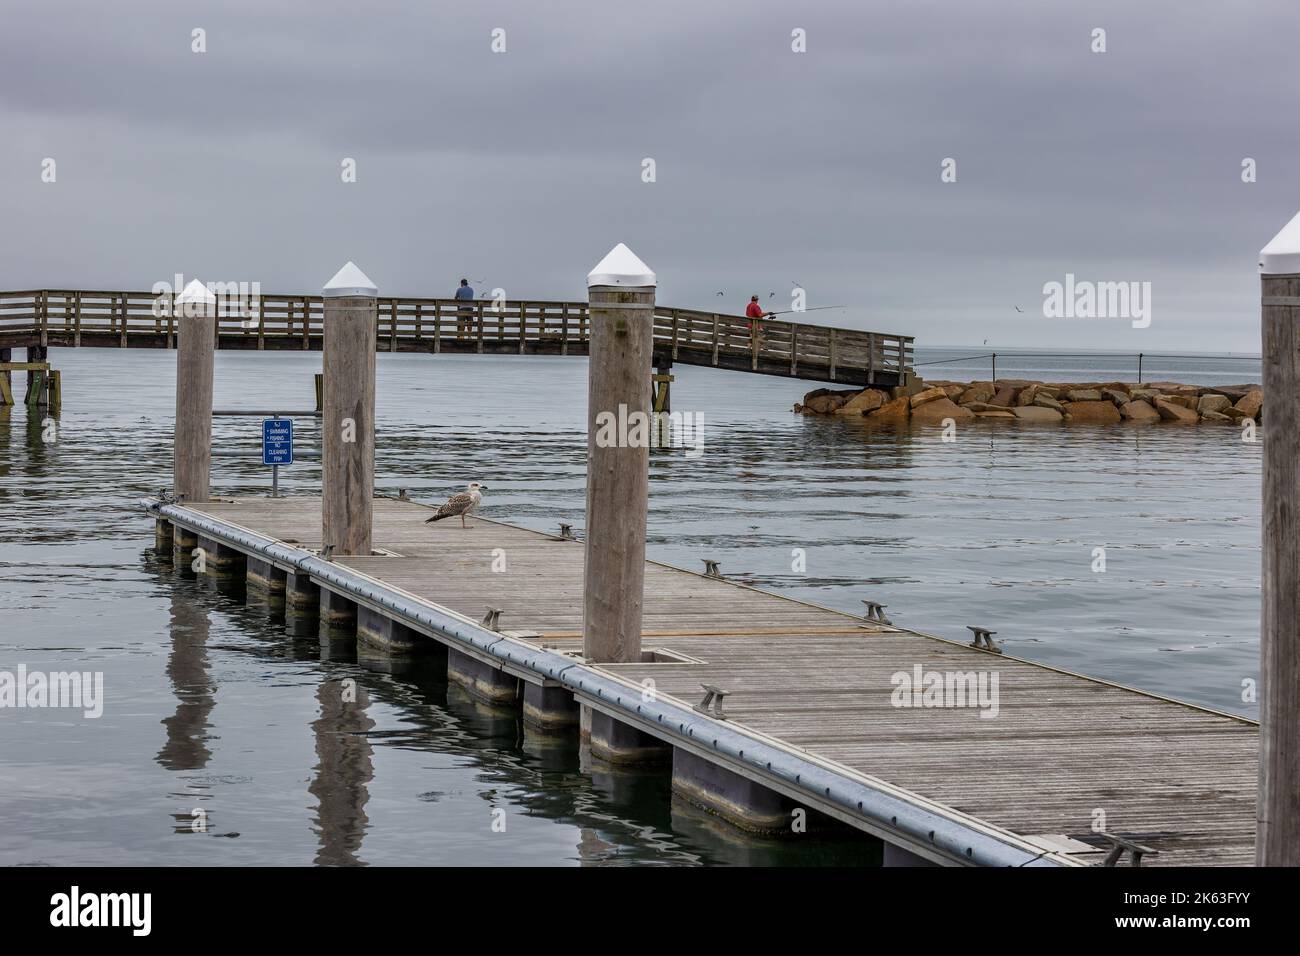 Plymouth, Massachusetts, USA - September 12, 2022: A seagul sits on a dock with fishermen fishing from dike and bridge in the background on Cape Bay a Stock Photo